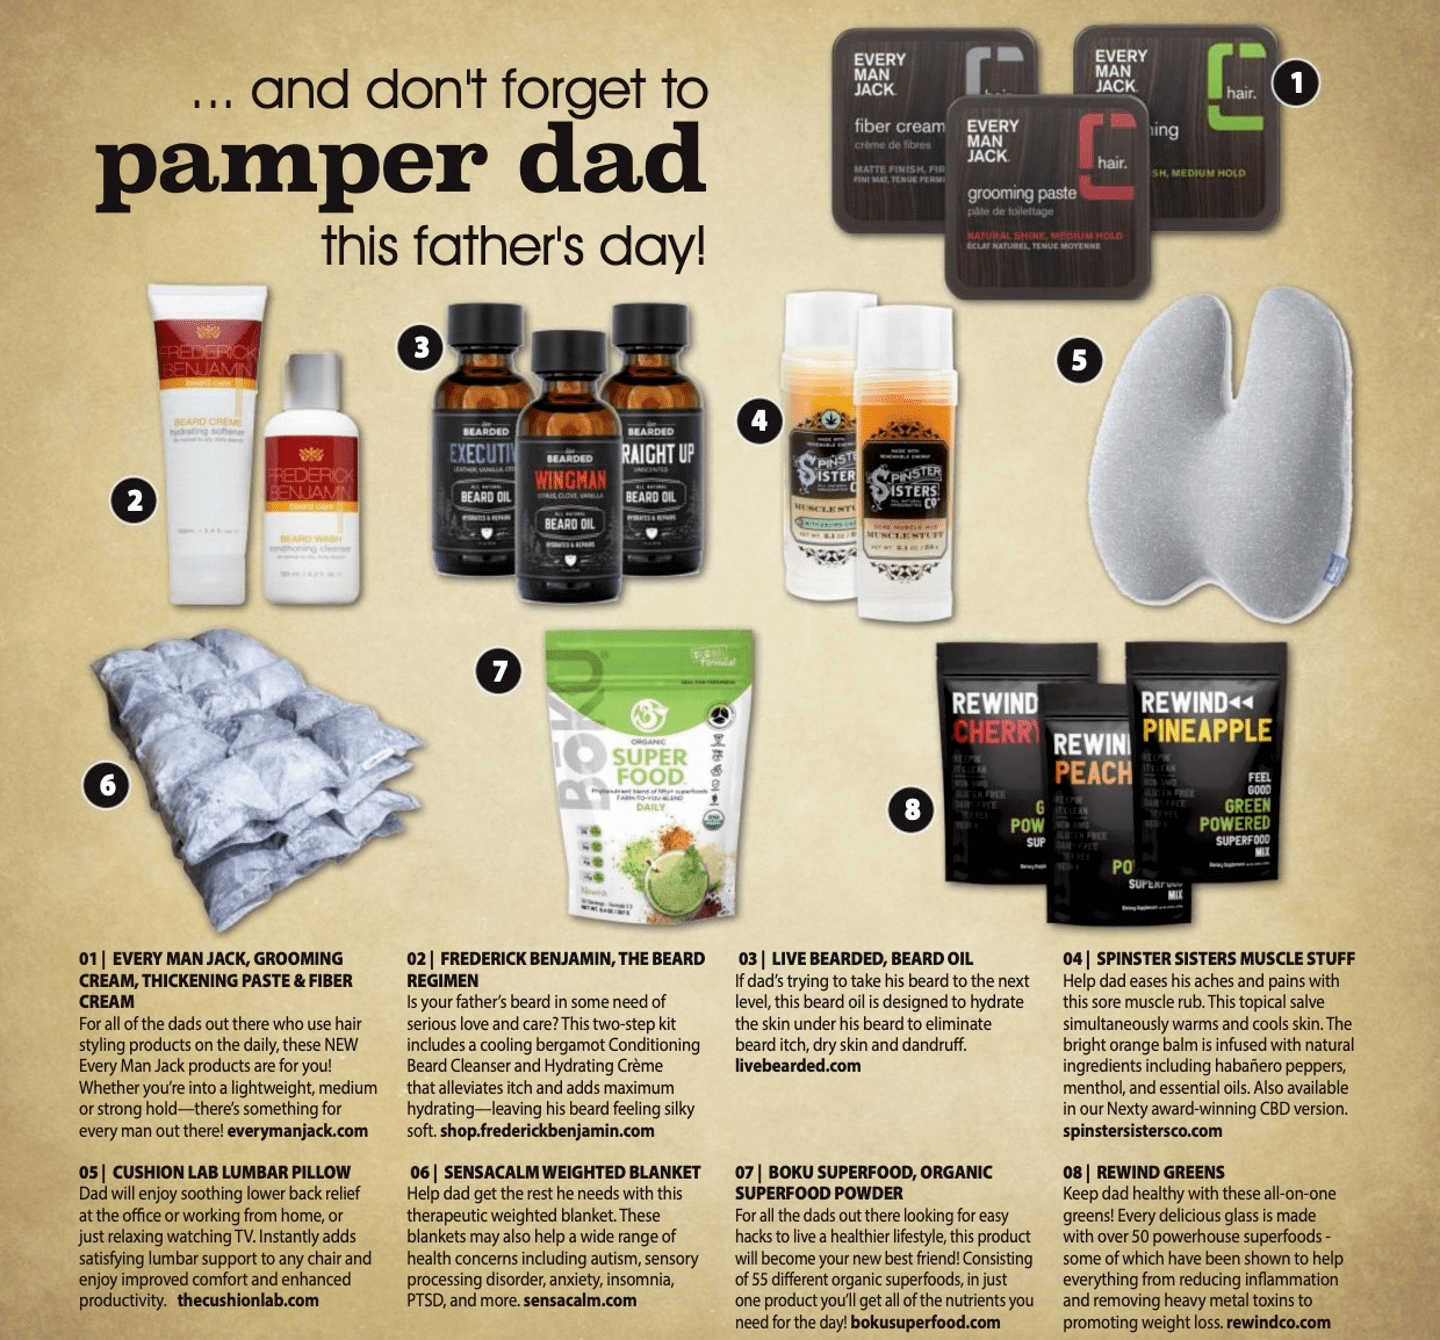 Great Mother's & Father's Day Gift-Giving Ideas: Superfood Powder Makes The List